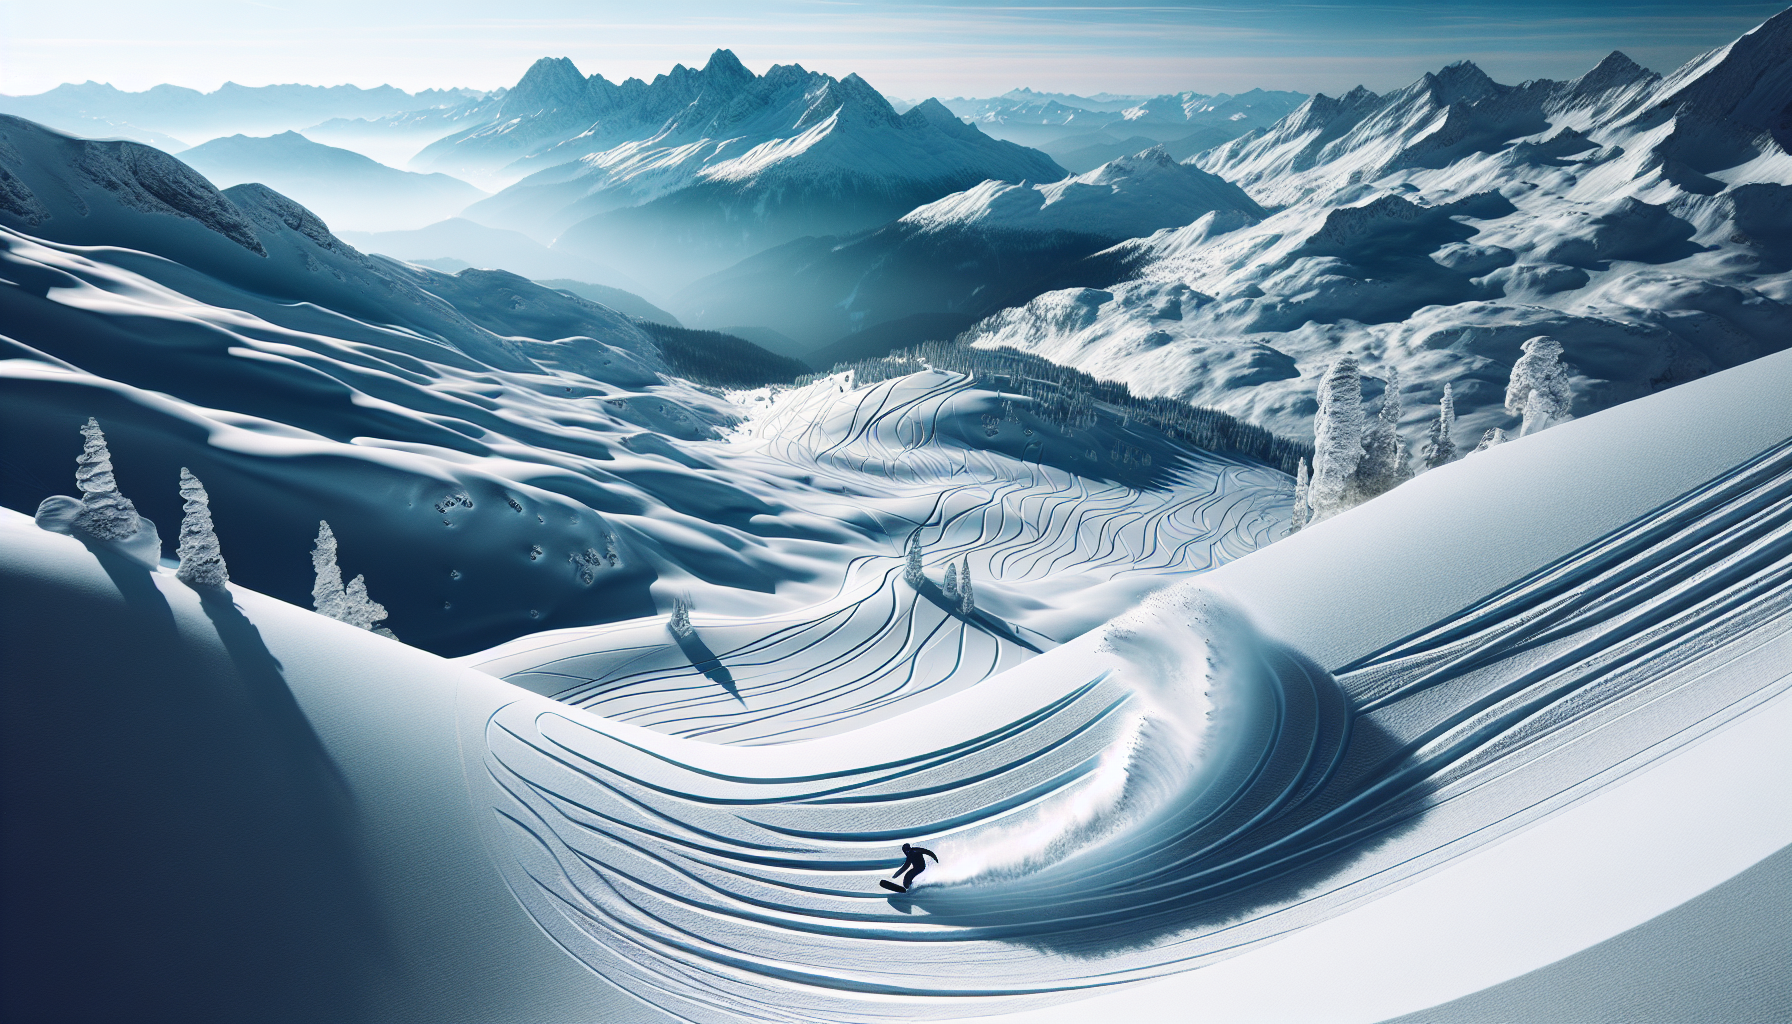 Choosing Between Skiing and Snowboarding: The Right Winter Sport for You